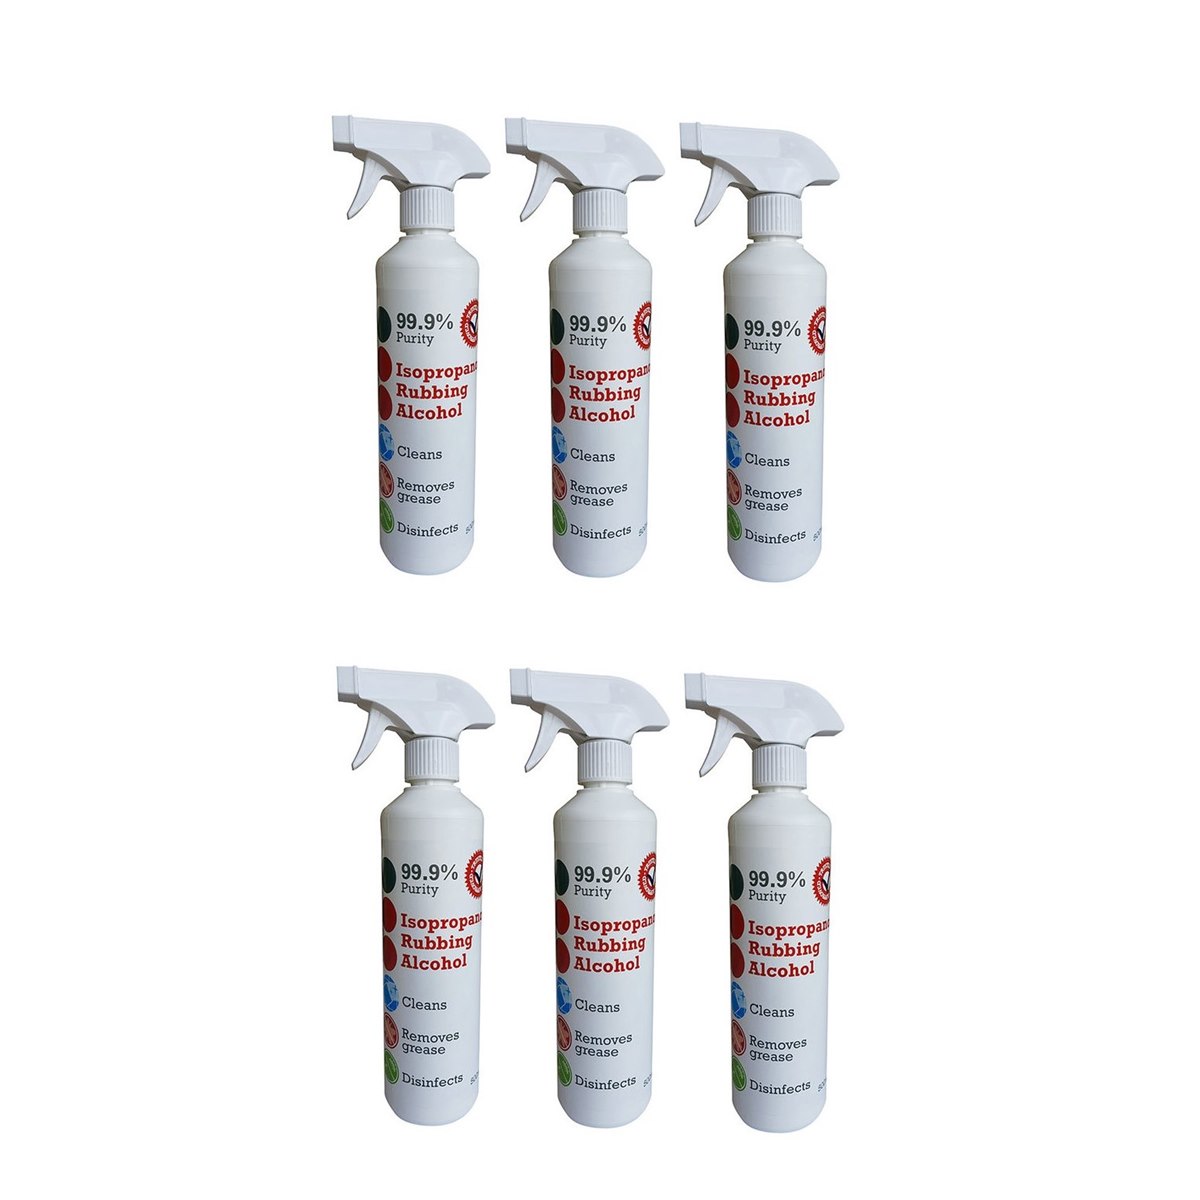 Case of 6 x Wilsons Isopropanol Rubbing Alcohol 99.9% Purity Spray 500ml